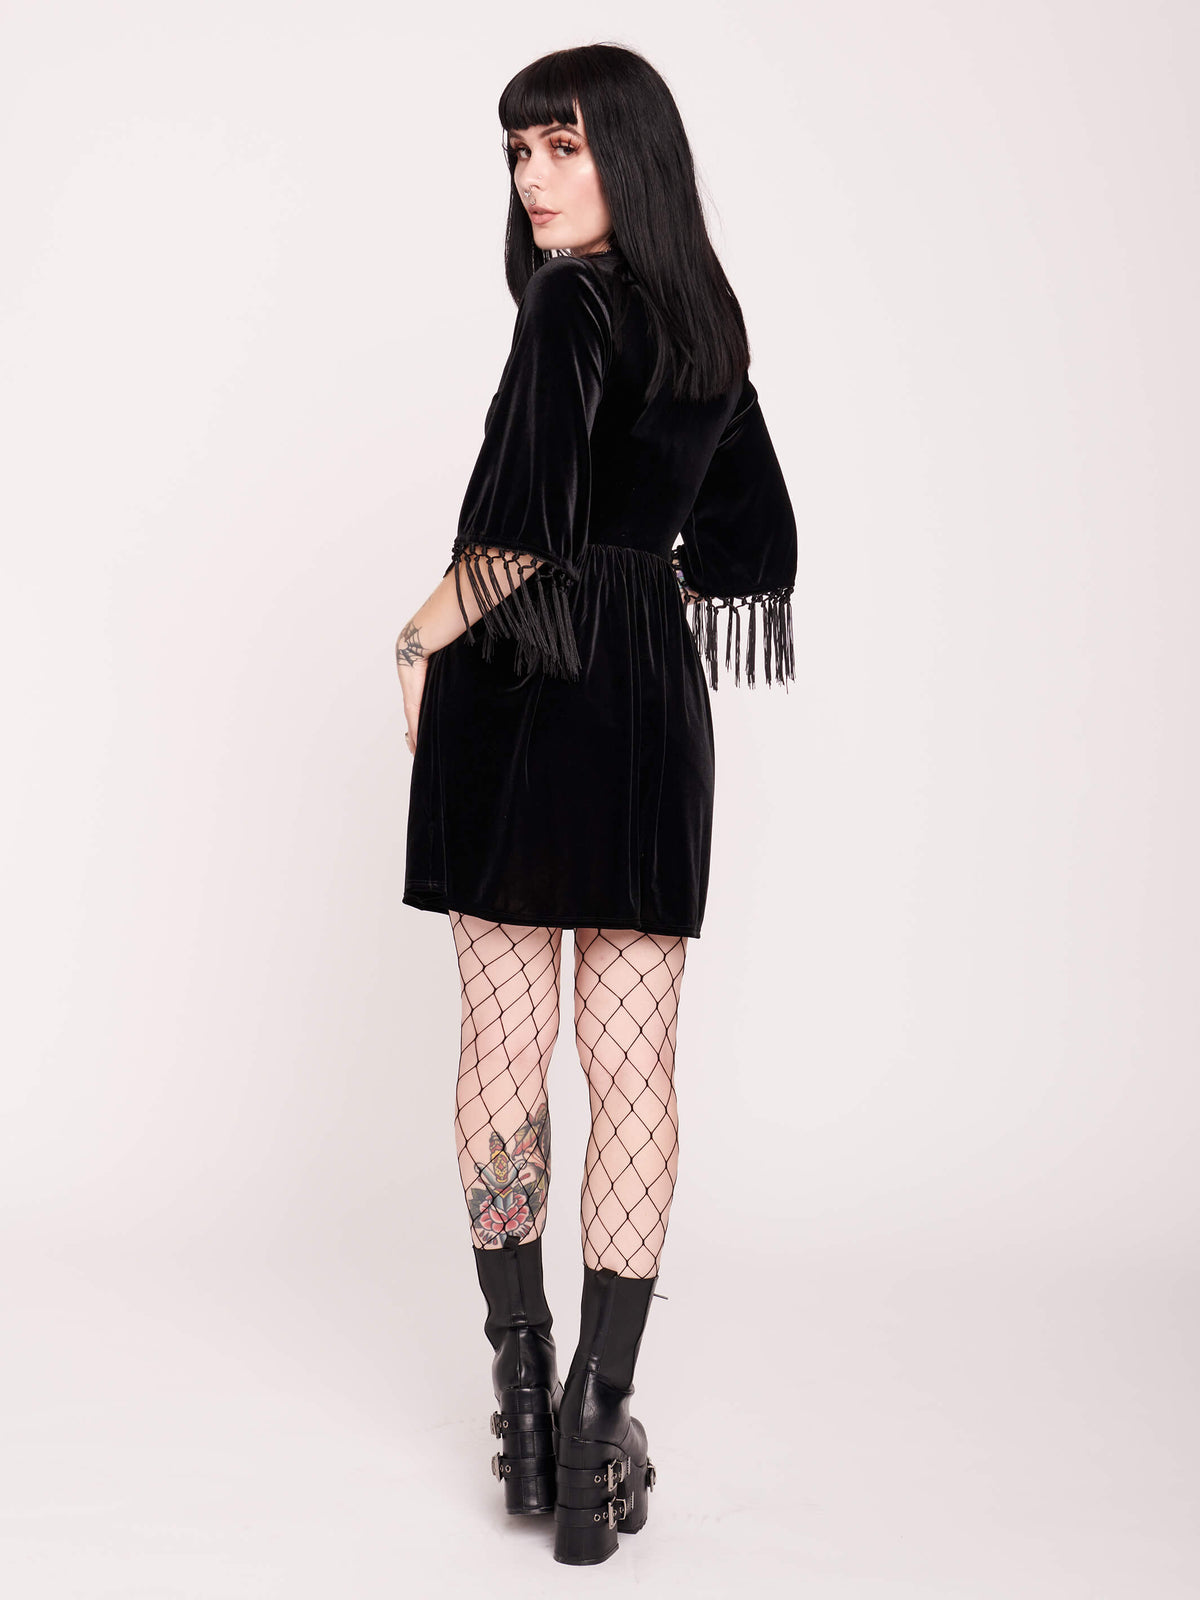 Good witch or bad witch? Day or evening? You decide when you wear our stretch velvet dress with fringe details on the sleeves. Stretch elastic at waist. Goth grunge fashion, alt girl fashion, goth clothing, gothic dress, black velvet dress, egirl fashion, emo fashion